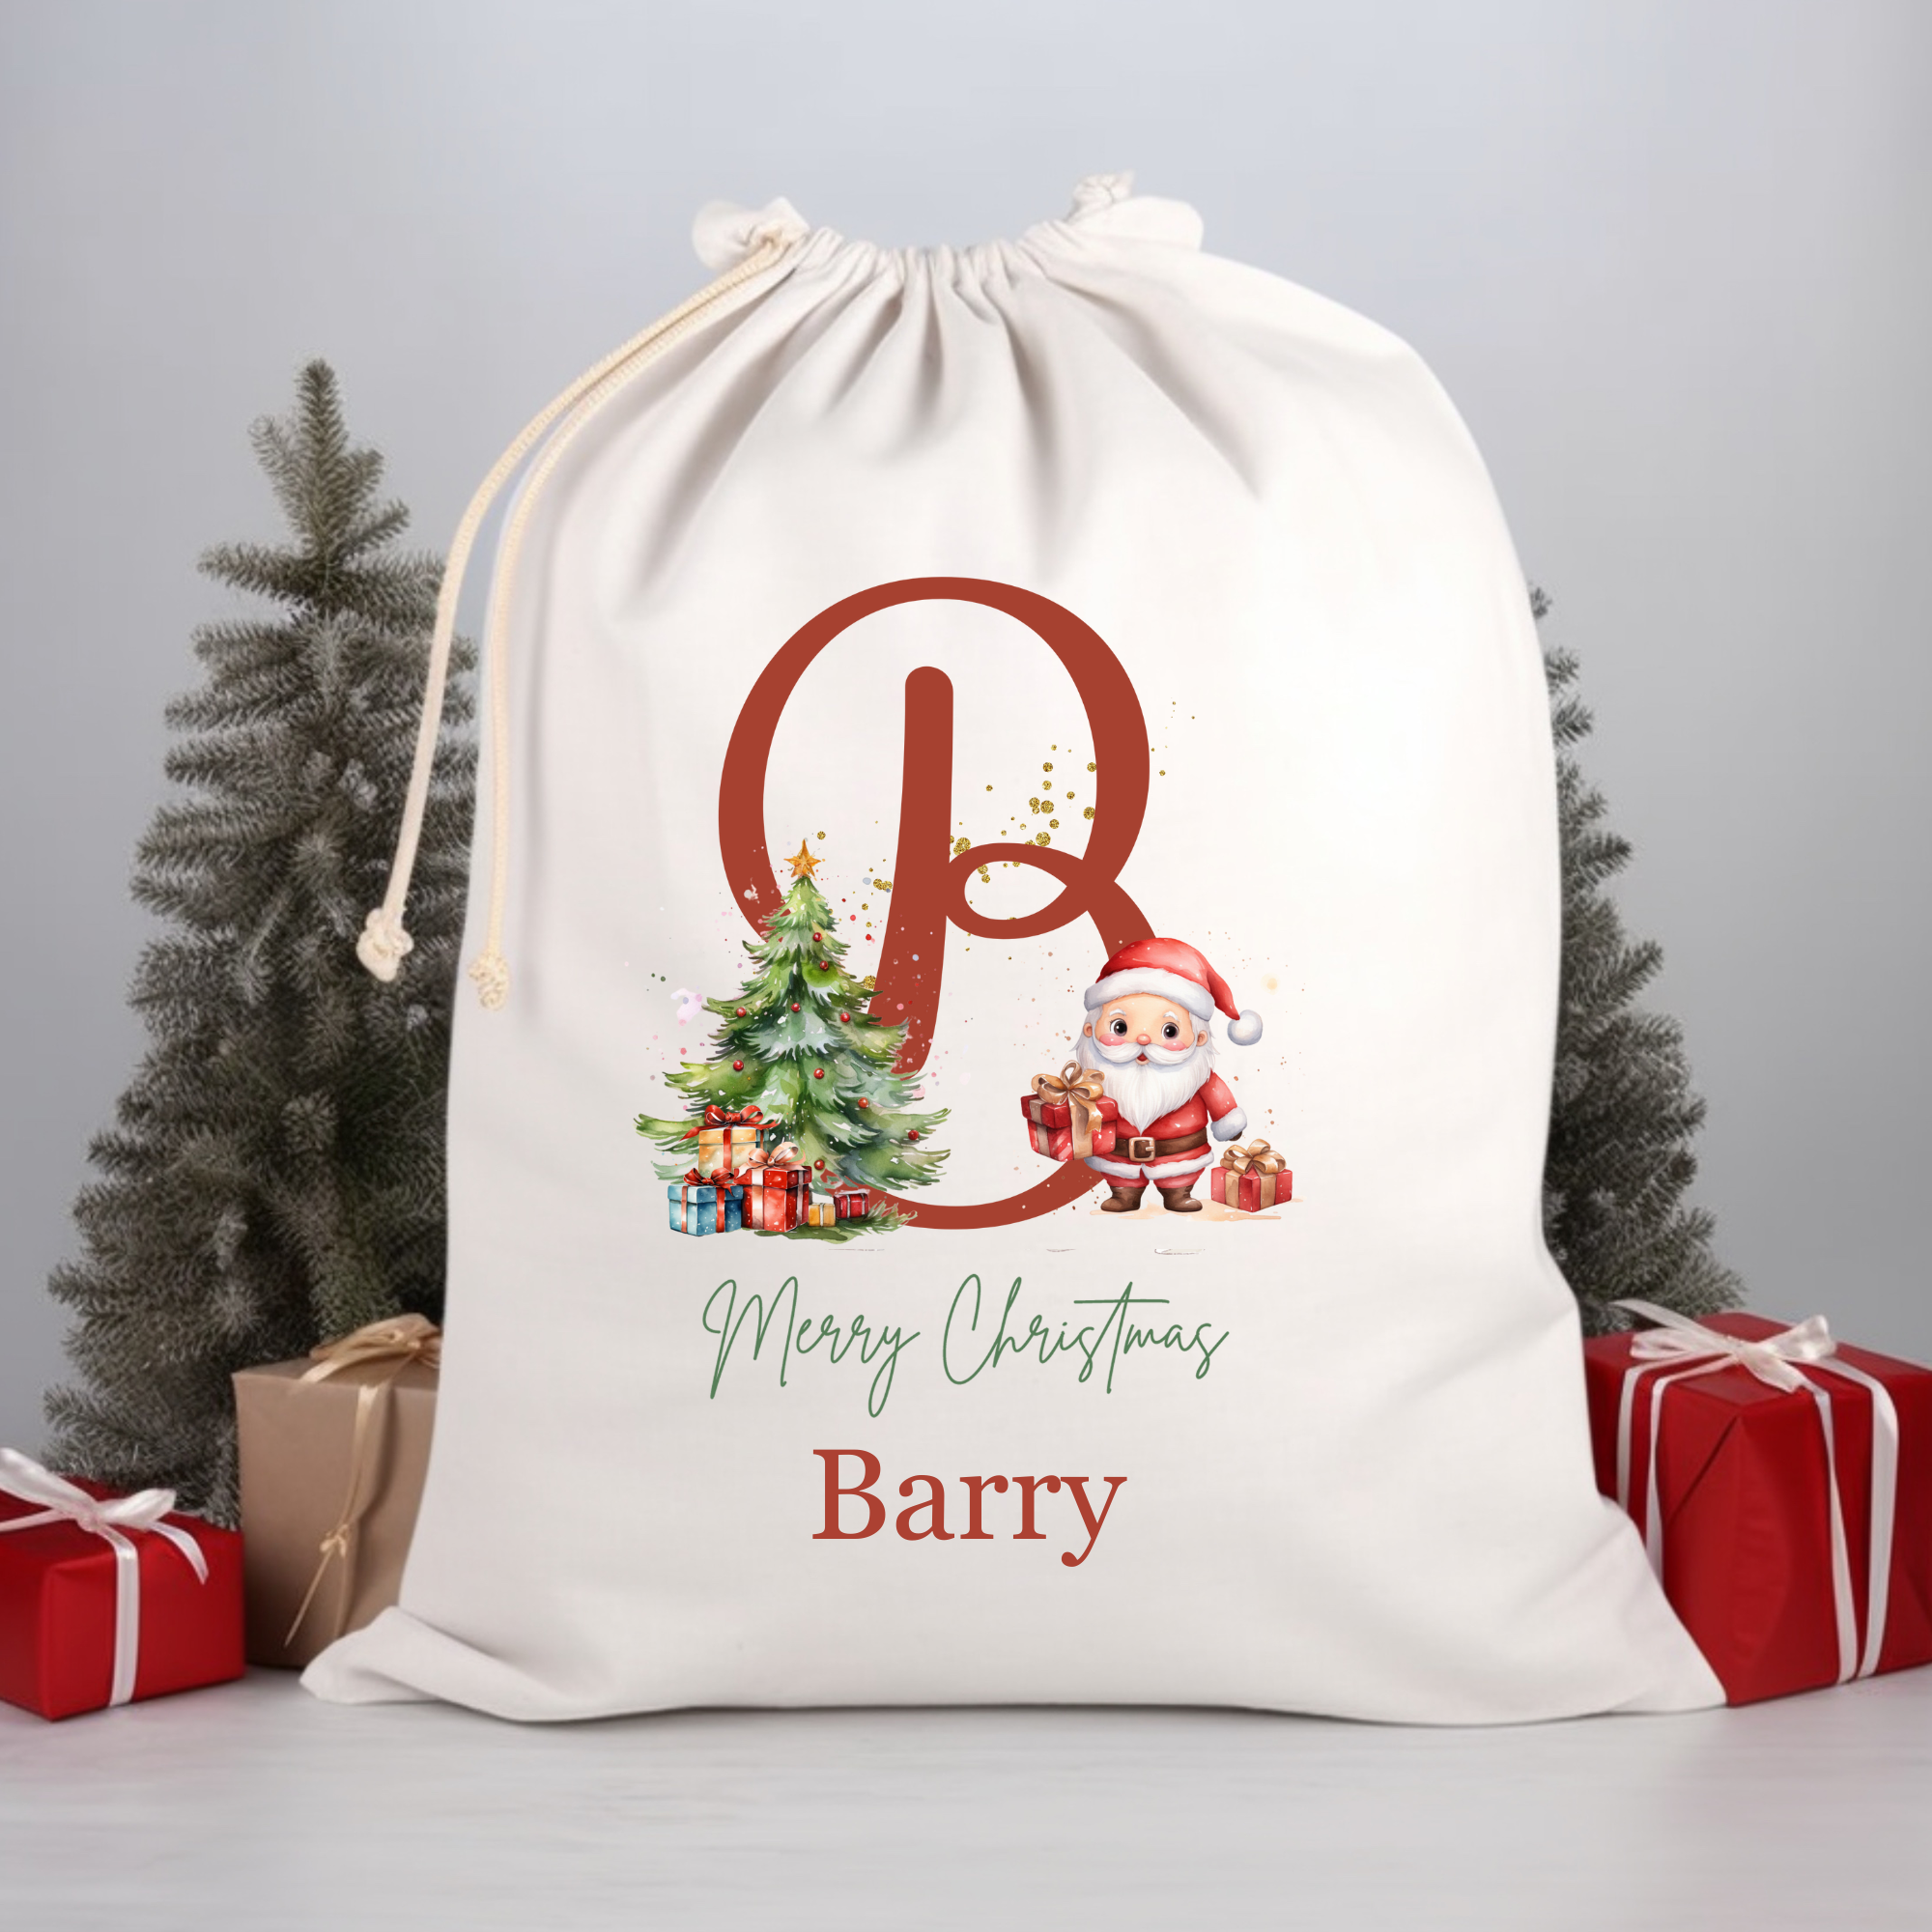 Personalized Christmas Tree Gift Sack